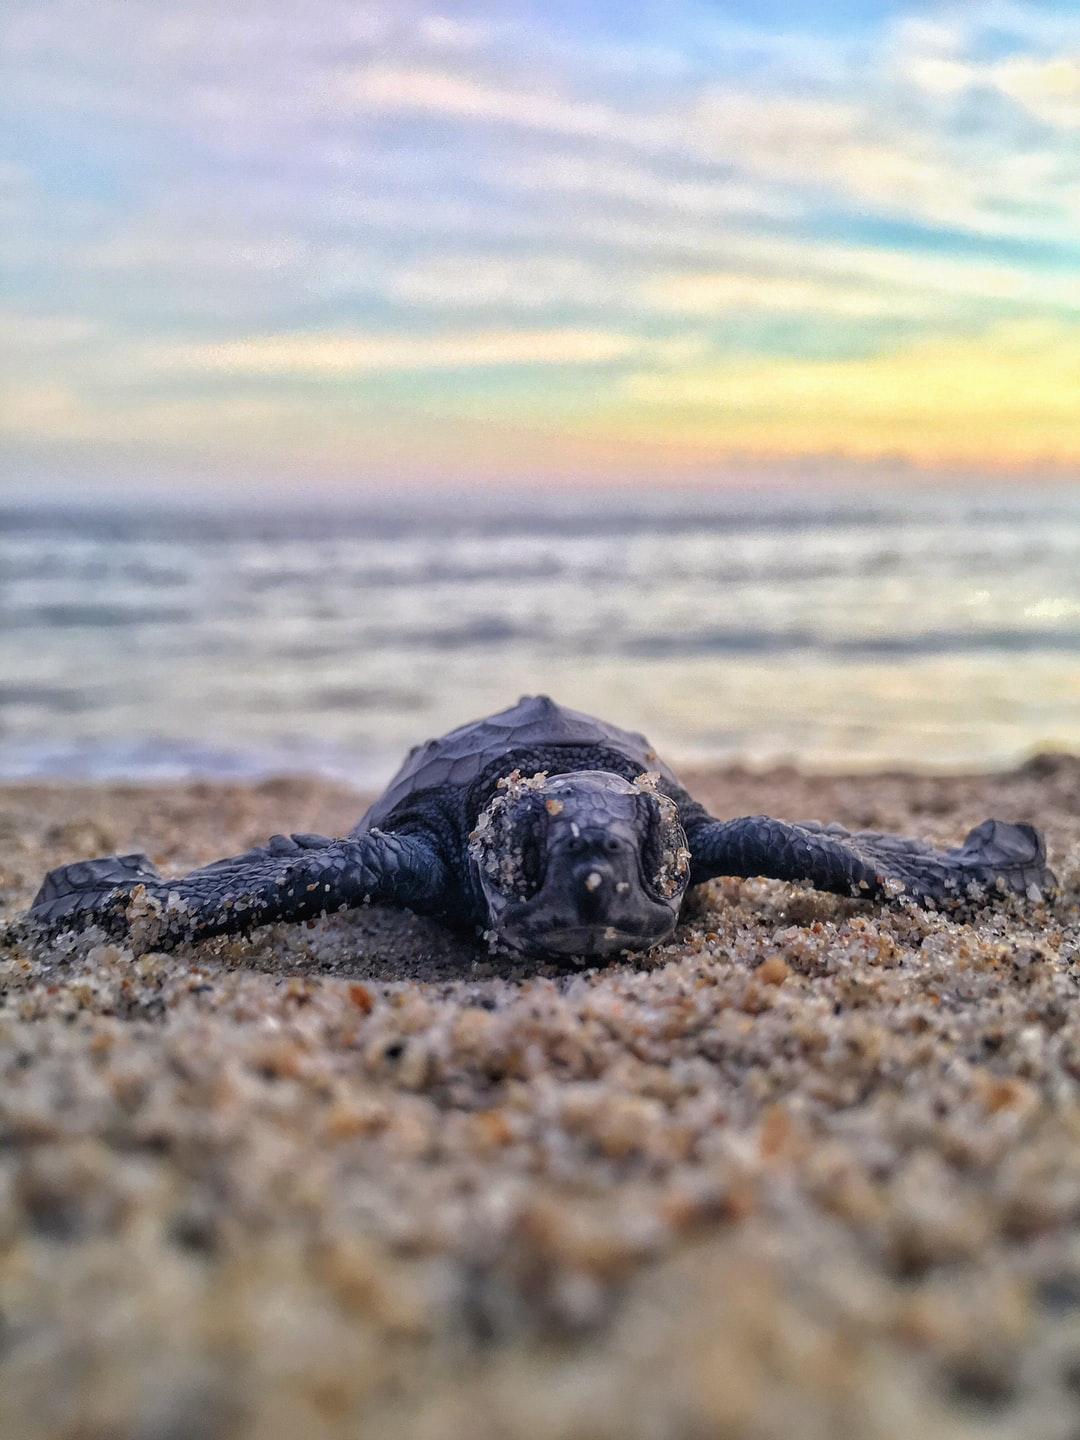 Baby Sea Turtle Picture [HD]. Download Free Image